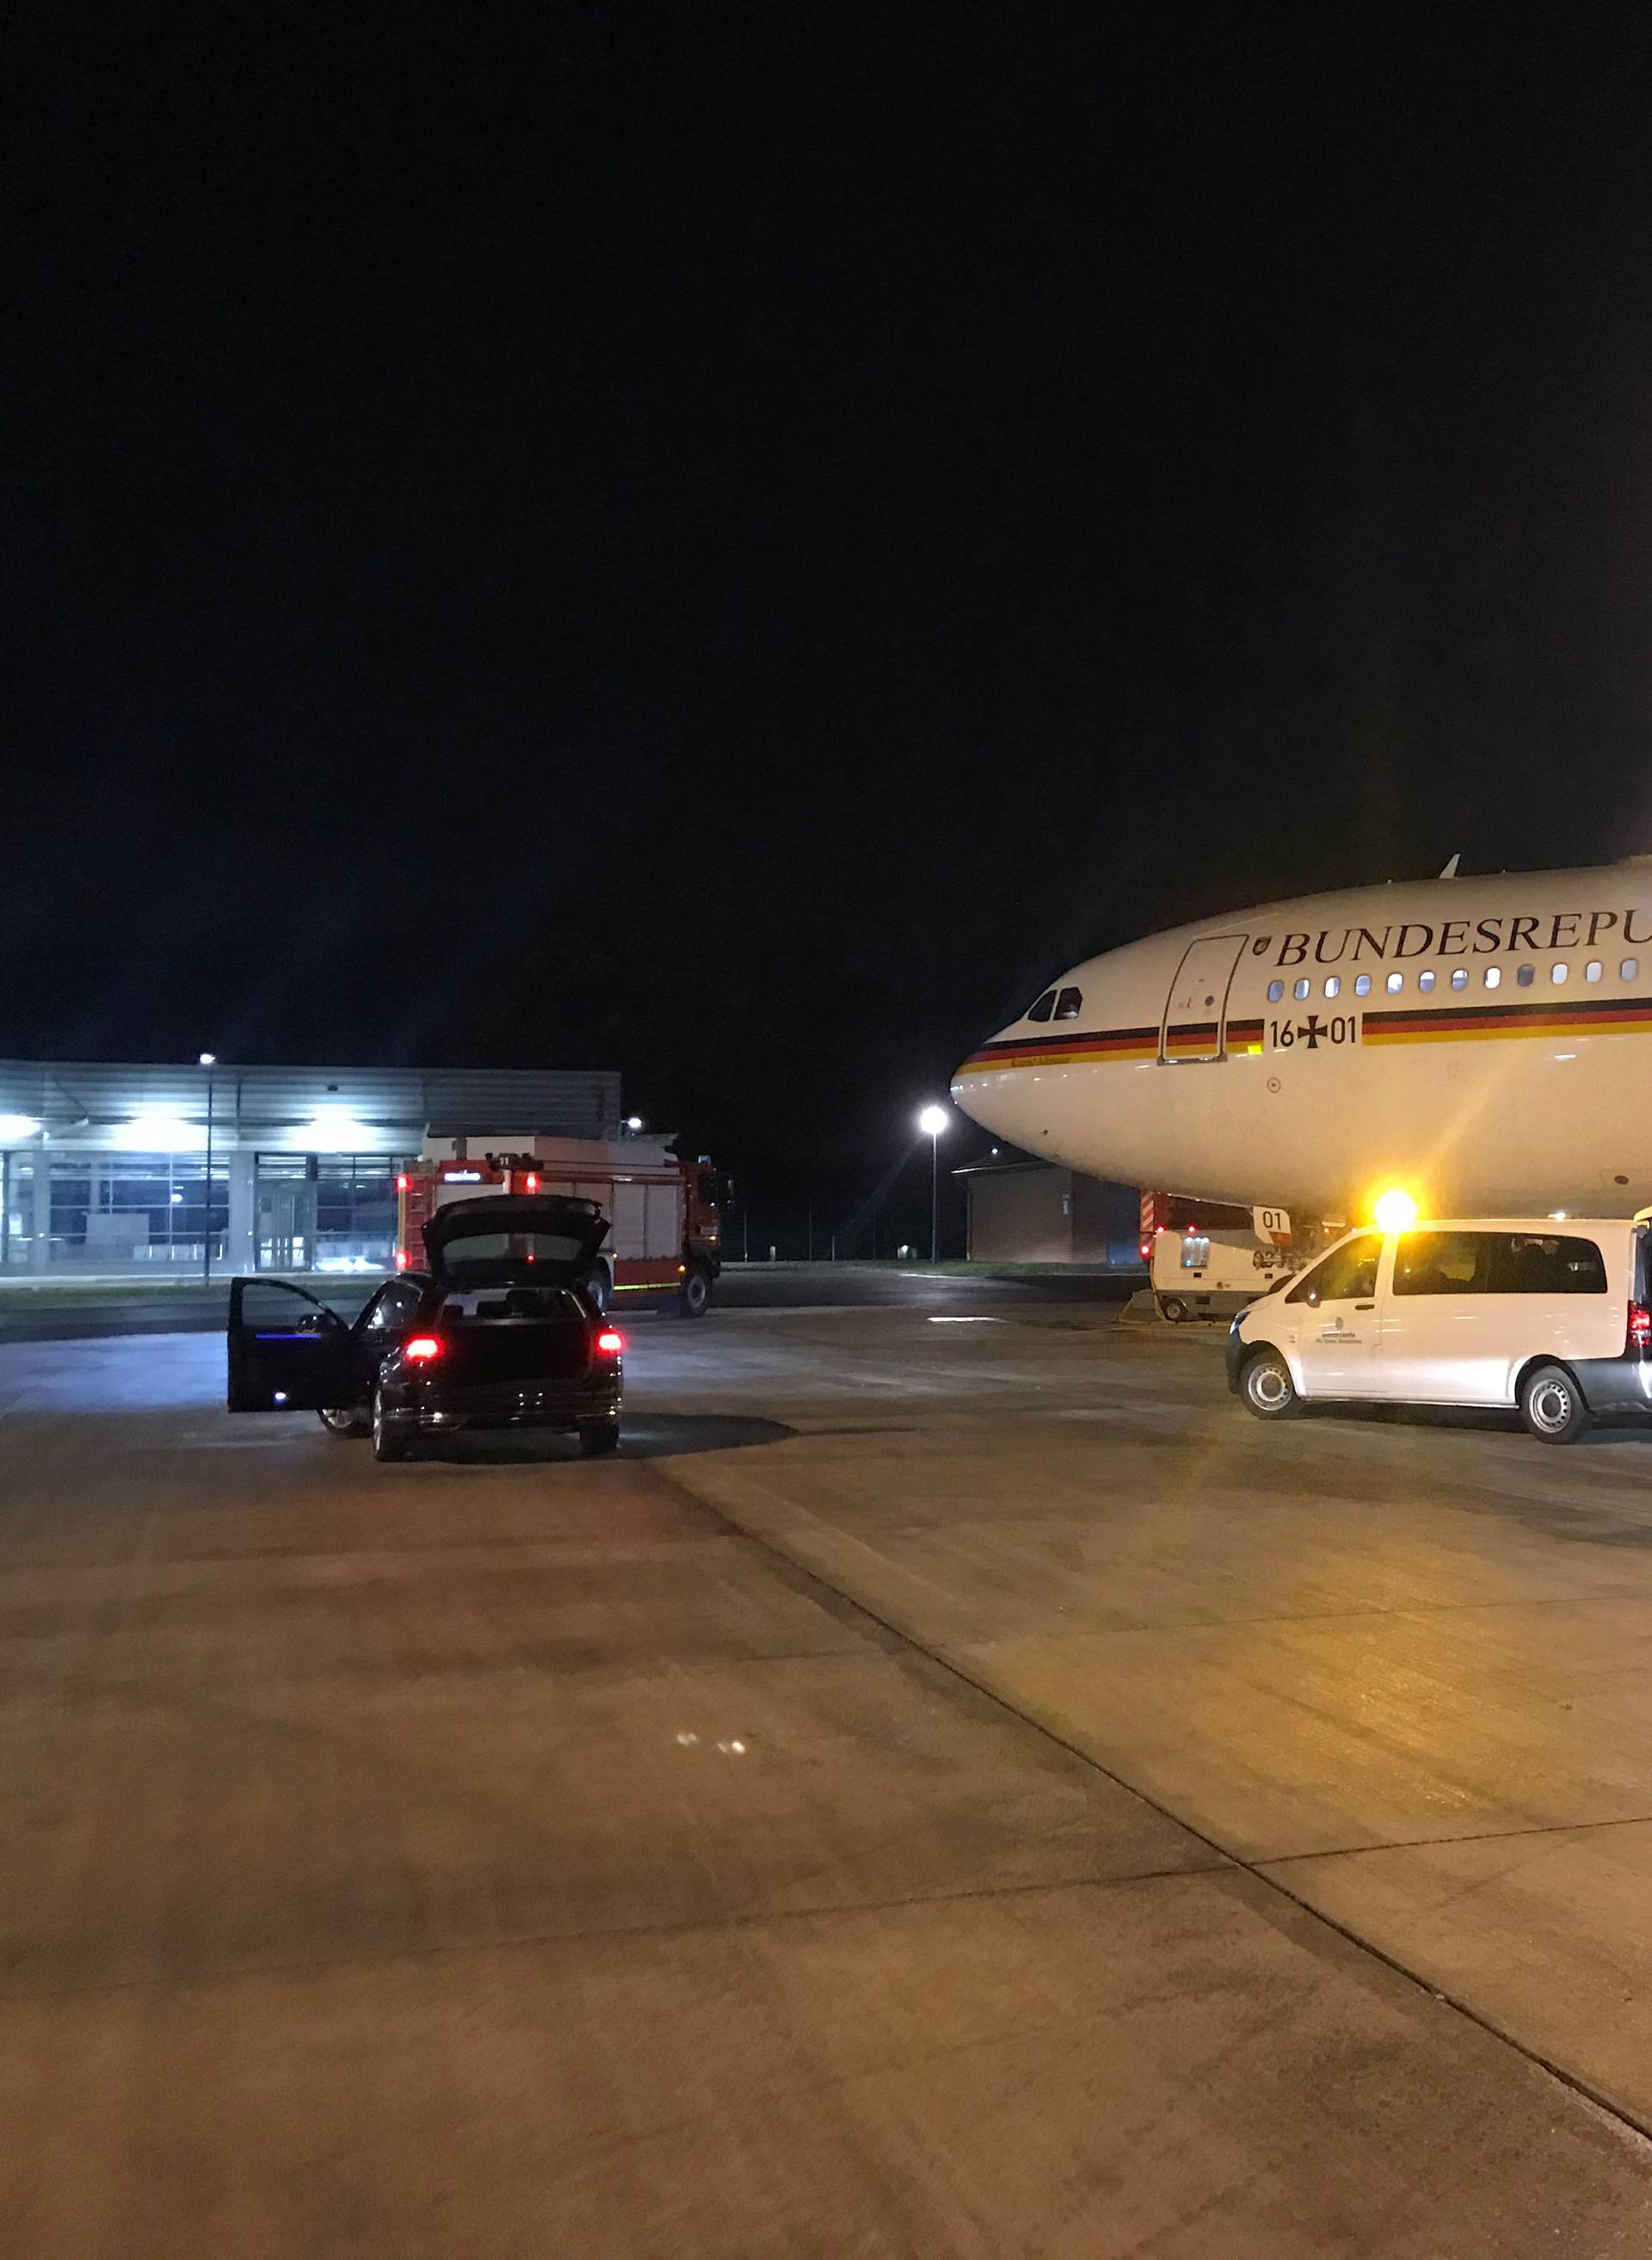 The Airbus A340 government aircraft carrying Chancellor Angela Merkel and the German delegation to the G20 summit in Buenos Aires which was forced to land shortly after taking off from Berlin sits at the Cologne-Bonn airport